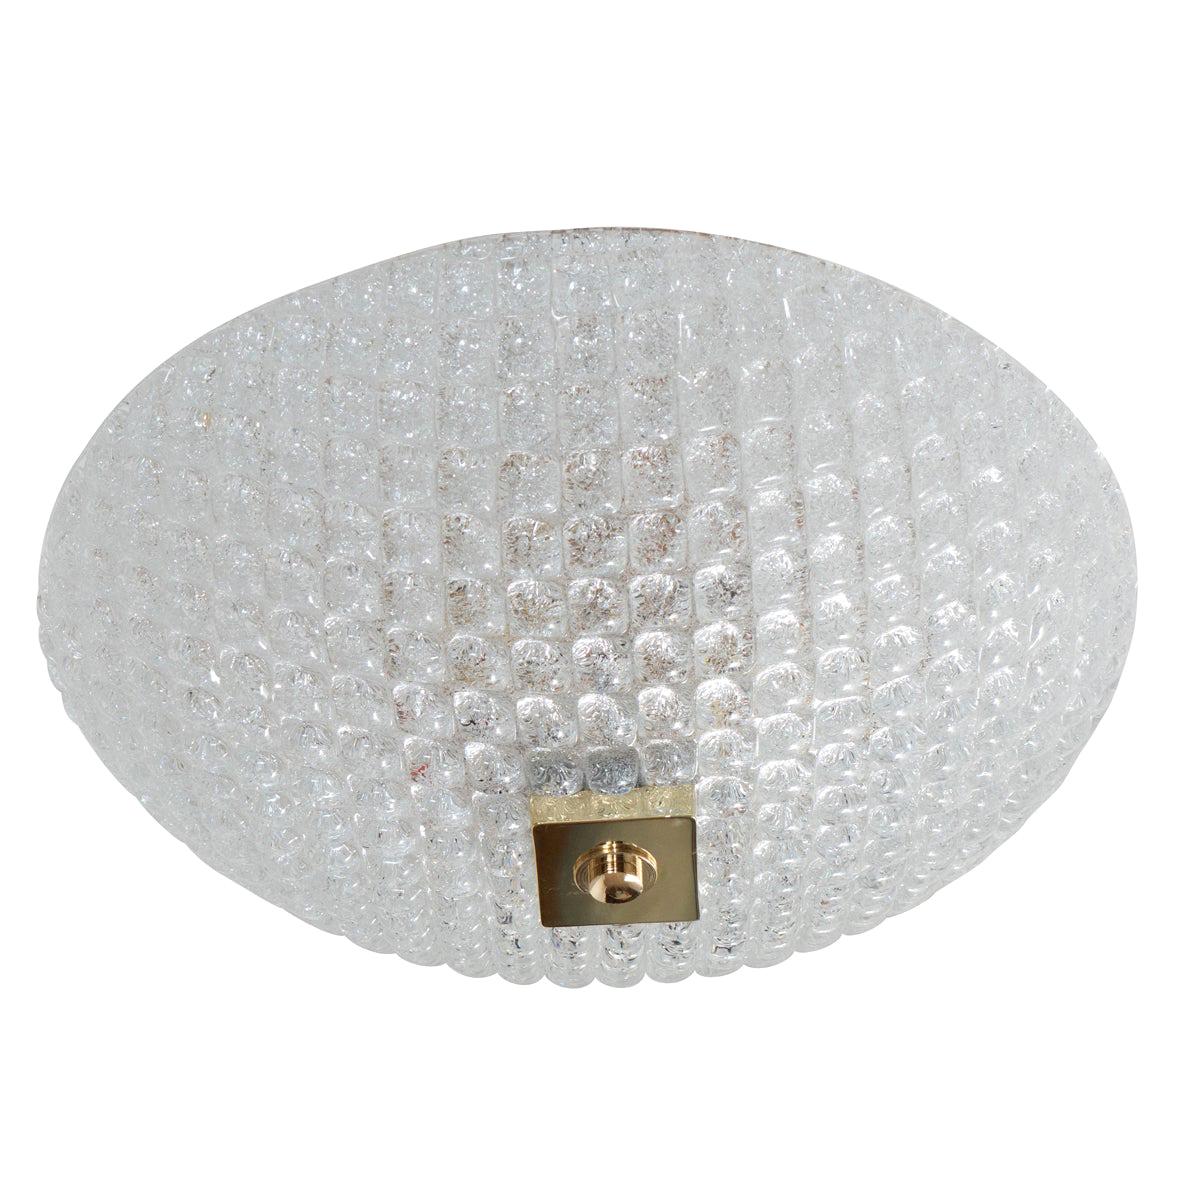 Small Dome Form Textured Glass Flush Mount Fixture